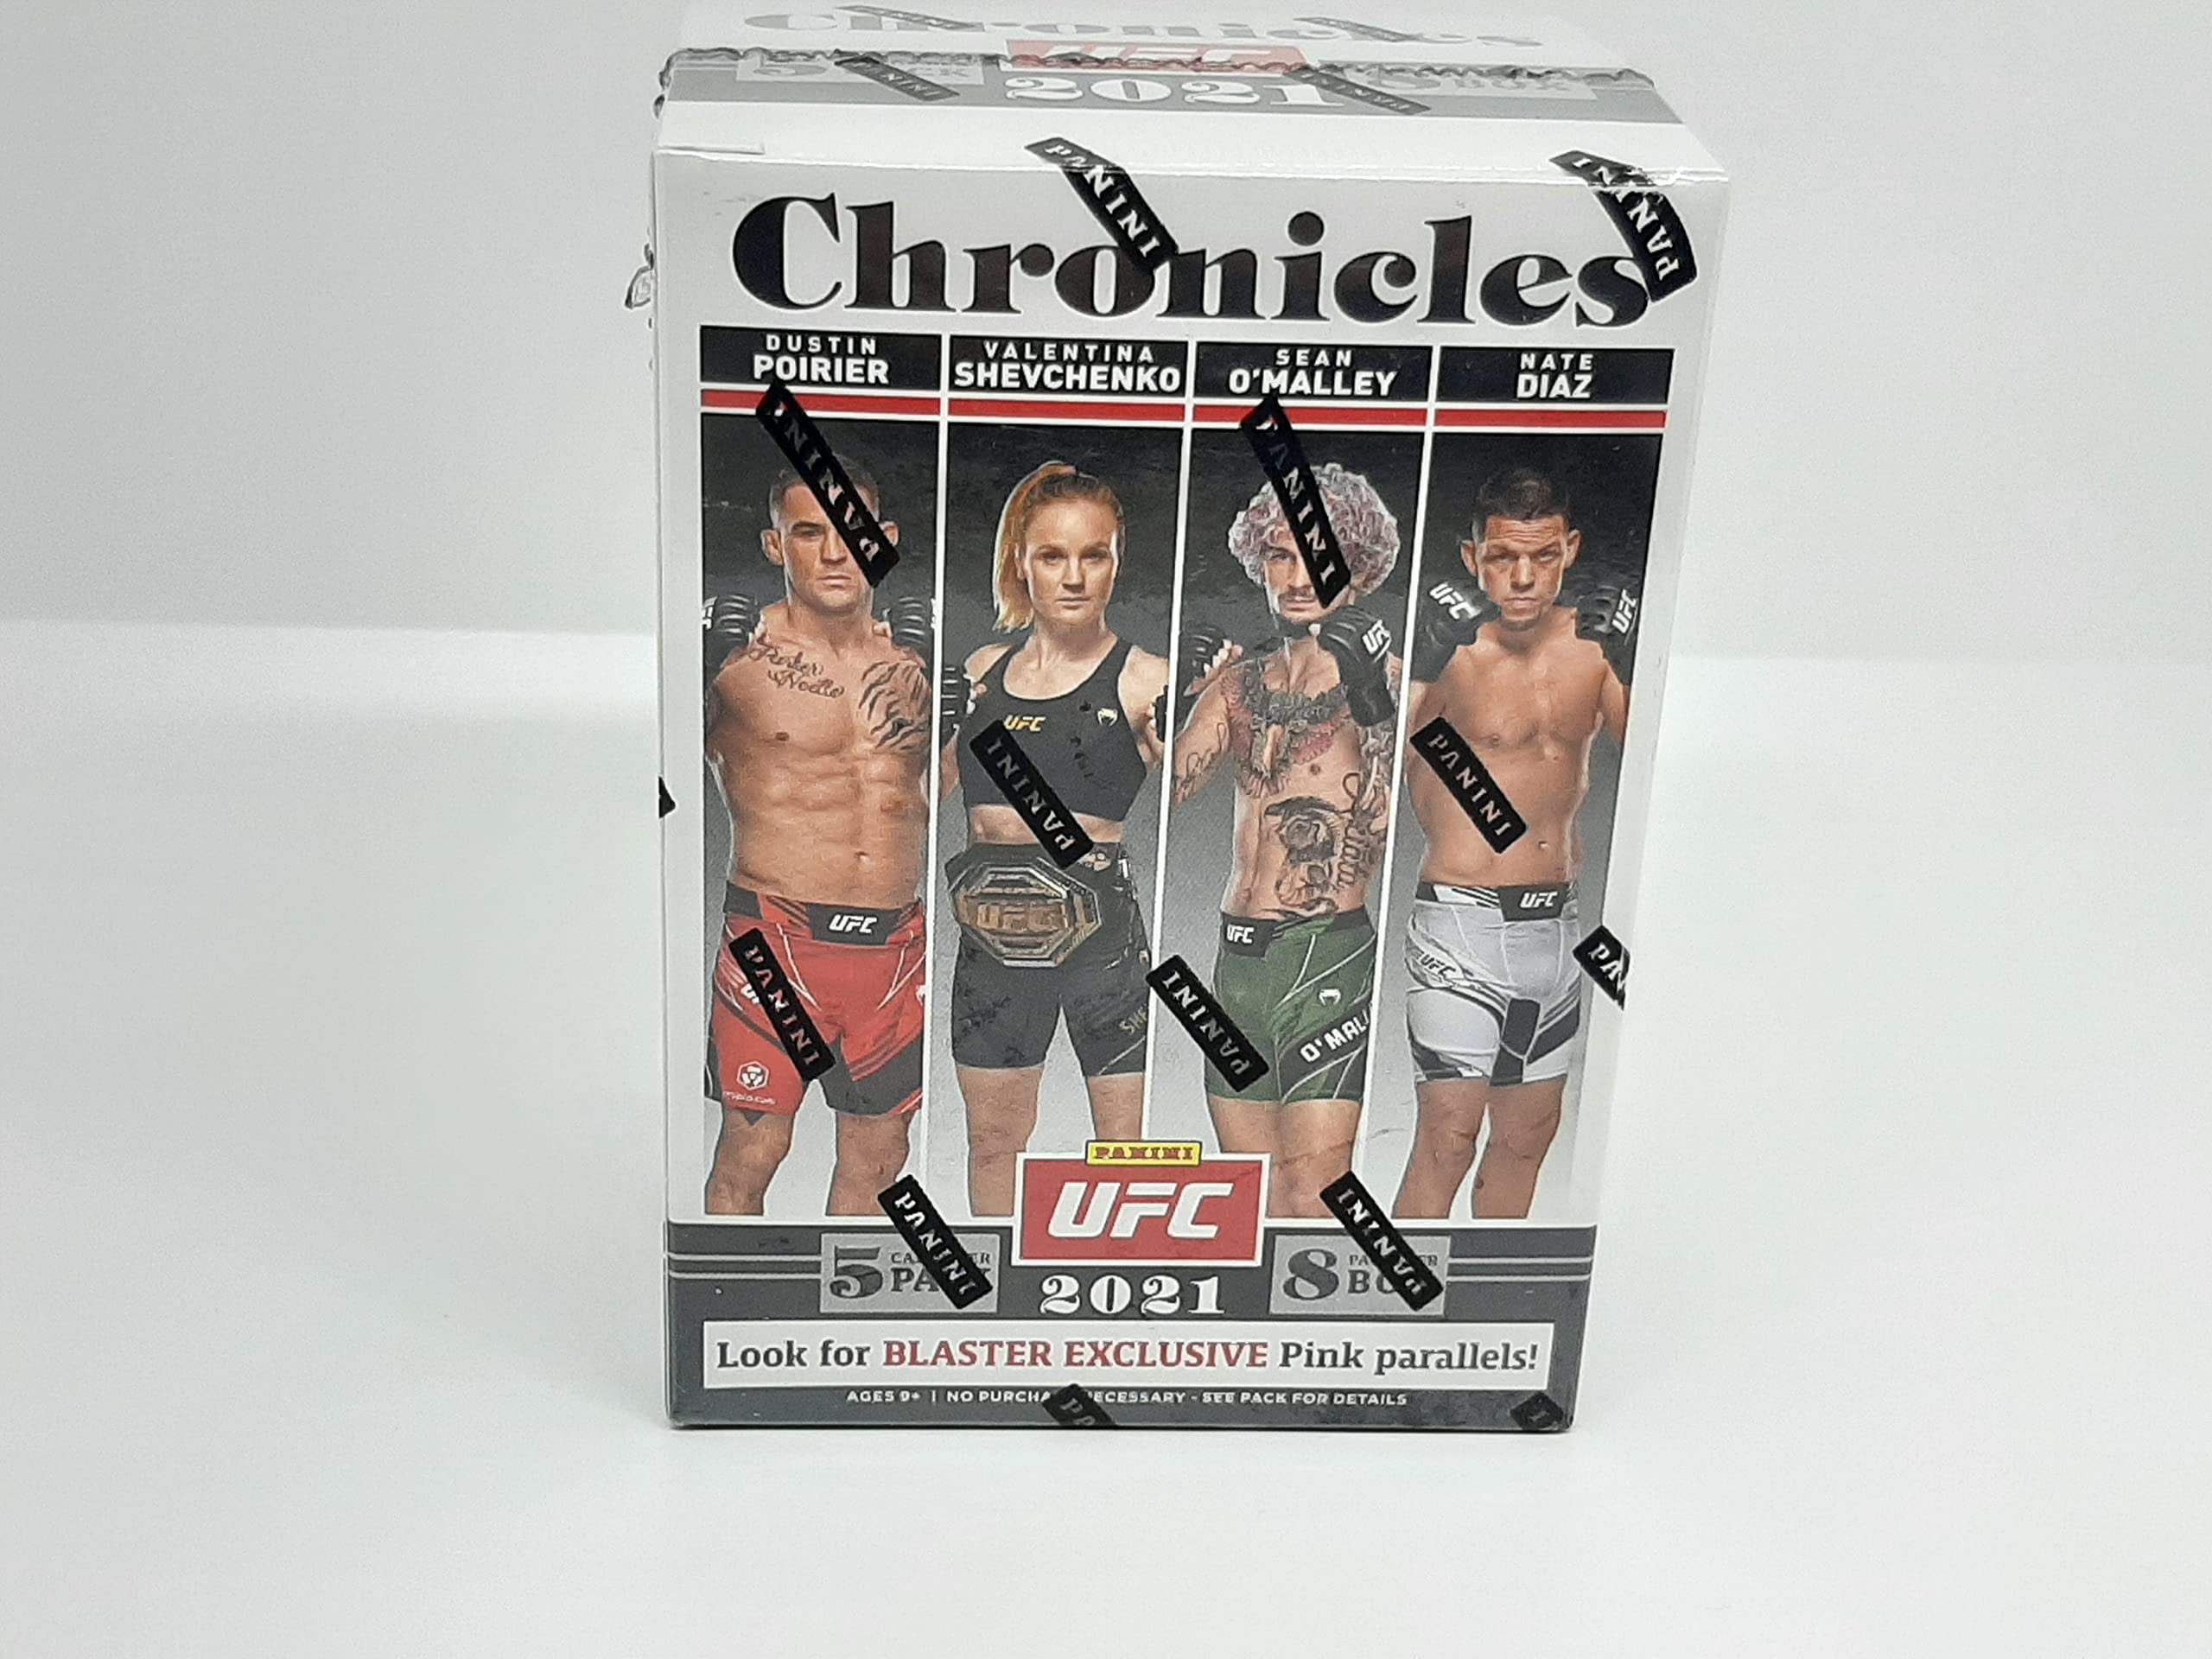 2010 TOPPS UFC STICK'N'MOVE SEALED BOX OF 20 STICKER PACKS 2 STICKERS PER PACK 